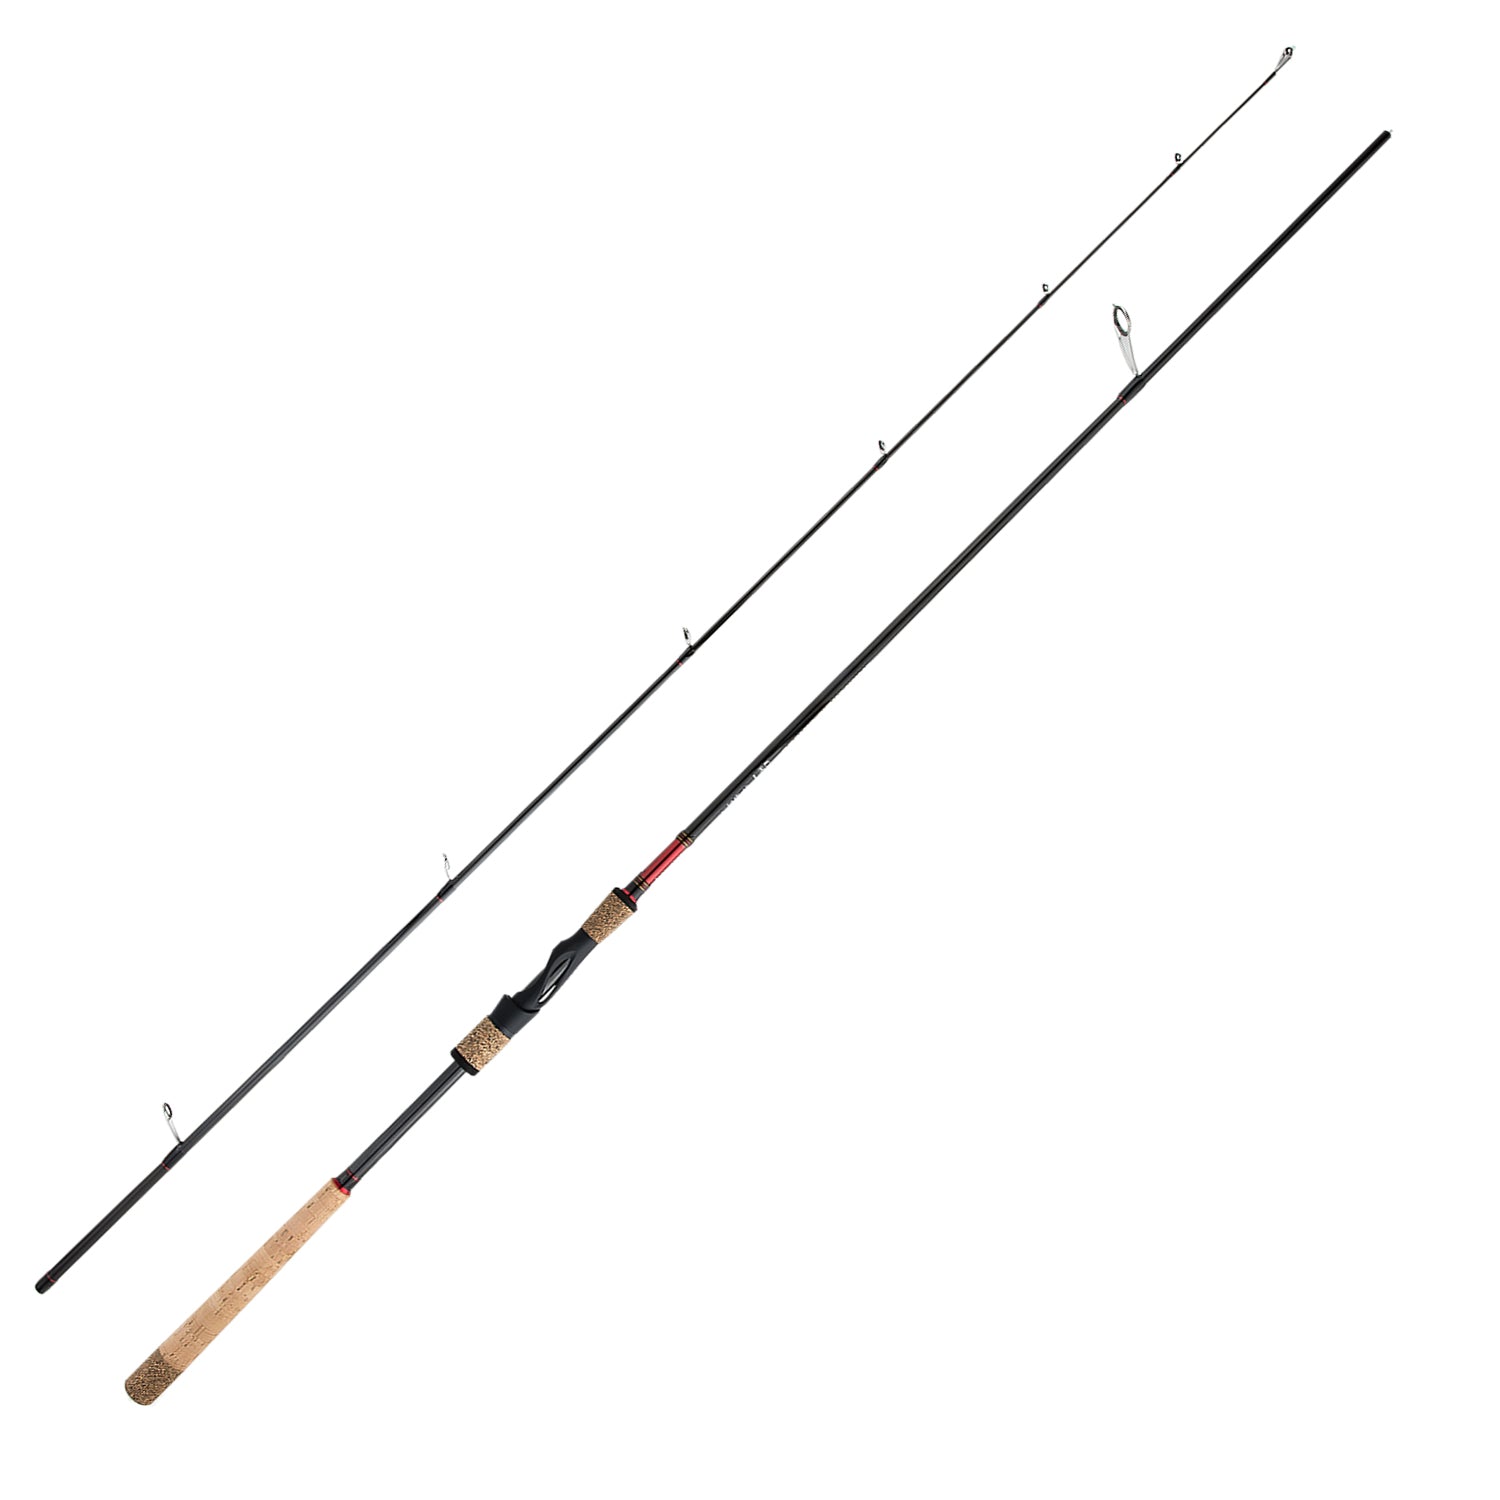 Berrypro BERRYPRO Surf Spinning Rod IM8 Carbon Surf Fishing Rod (9